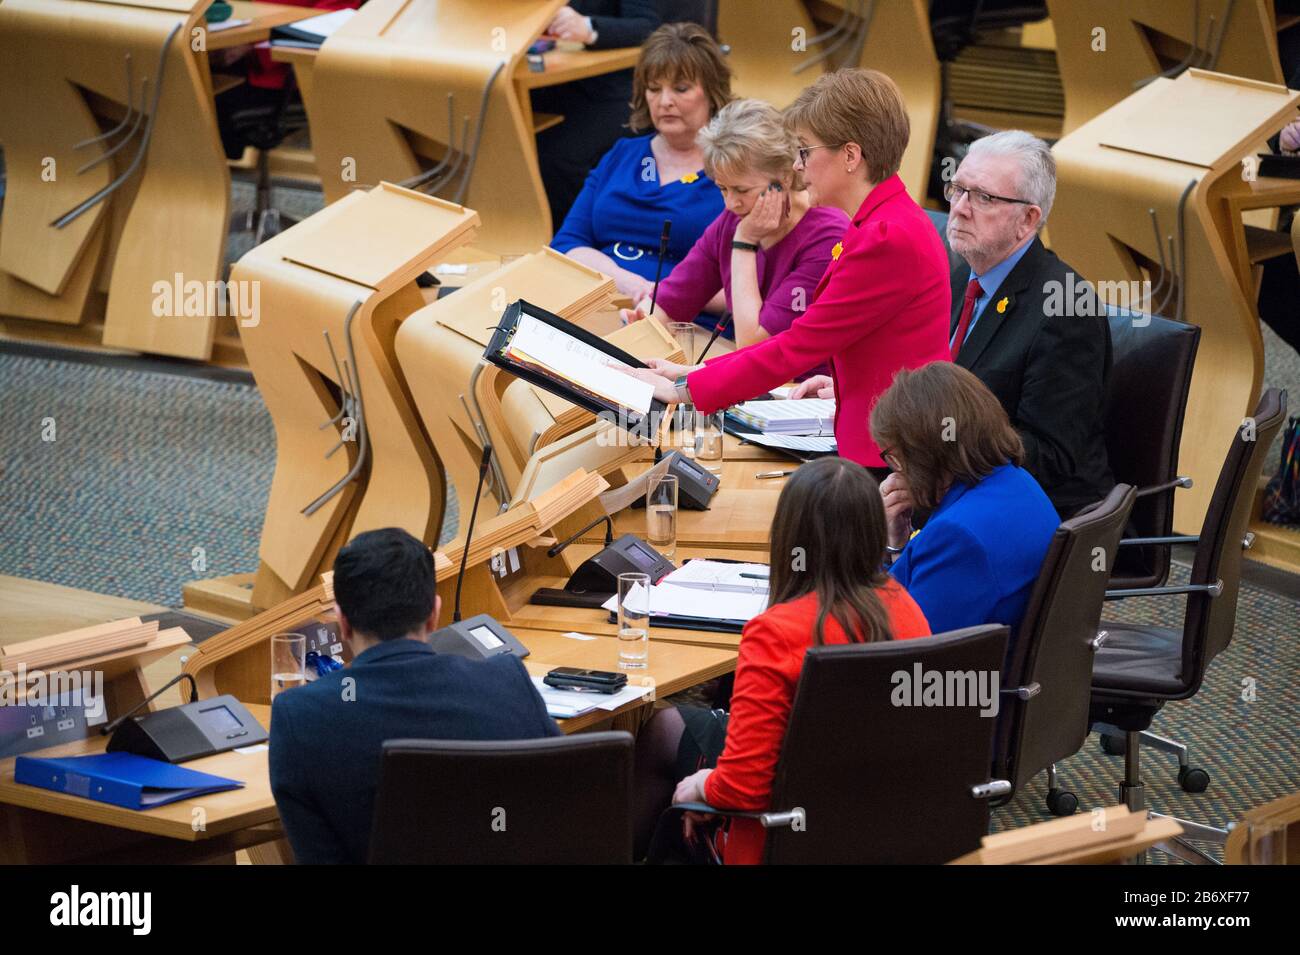 Edinburgh, UK. 12th Mar, 2020. Pictured: Nicola Sturgeon MSP - First Minister of Scotland and Leader of the Scottish National Party (SNP). Scenes from First Ministers Questions at the Scottish Parliament on the first week of the trial of Former First Minister - Alex Salmond, and tensions aa running high at Holyrood. Credit: Colin Fisher/Alamy Live News Stock Photo